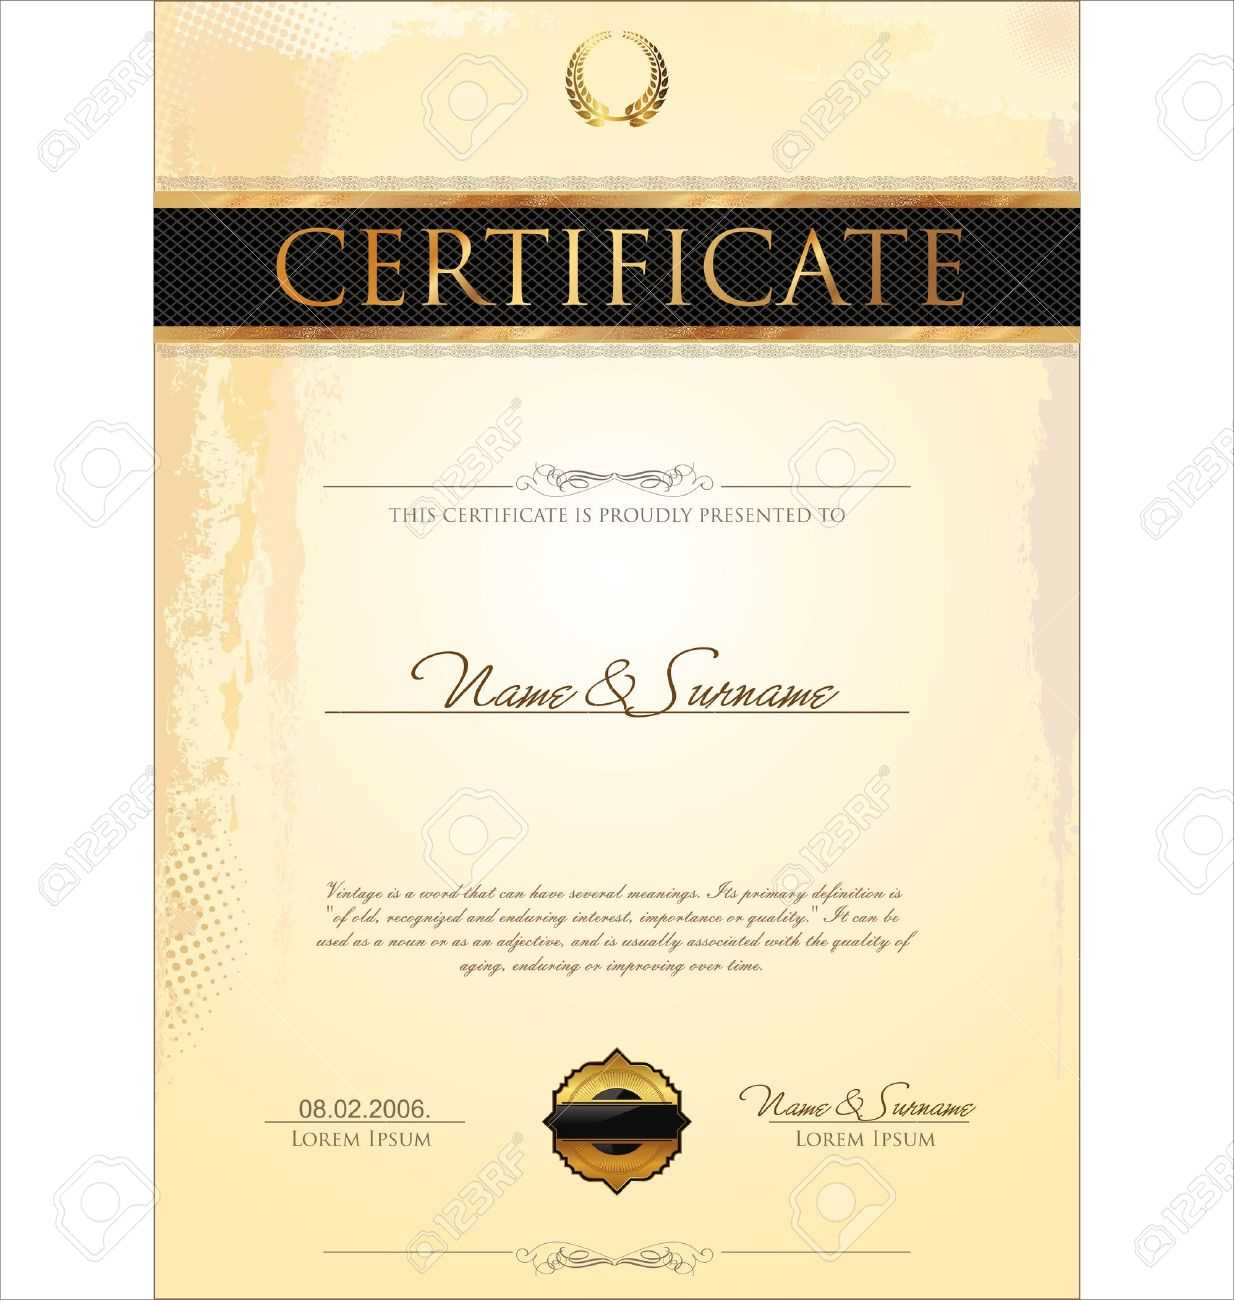 Certificate Template With Regard To Free Stock Certificate Template Download